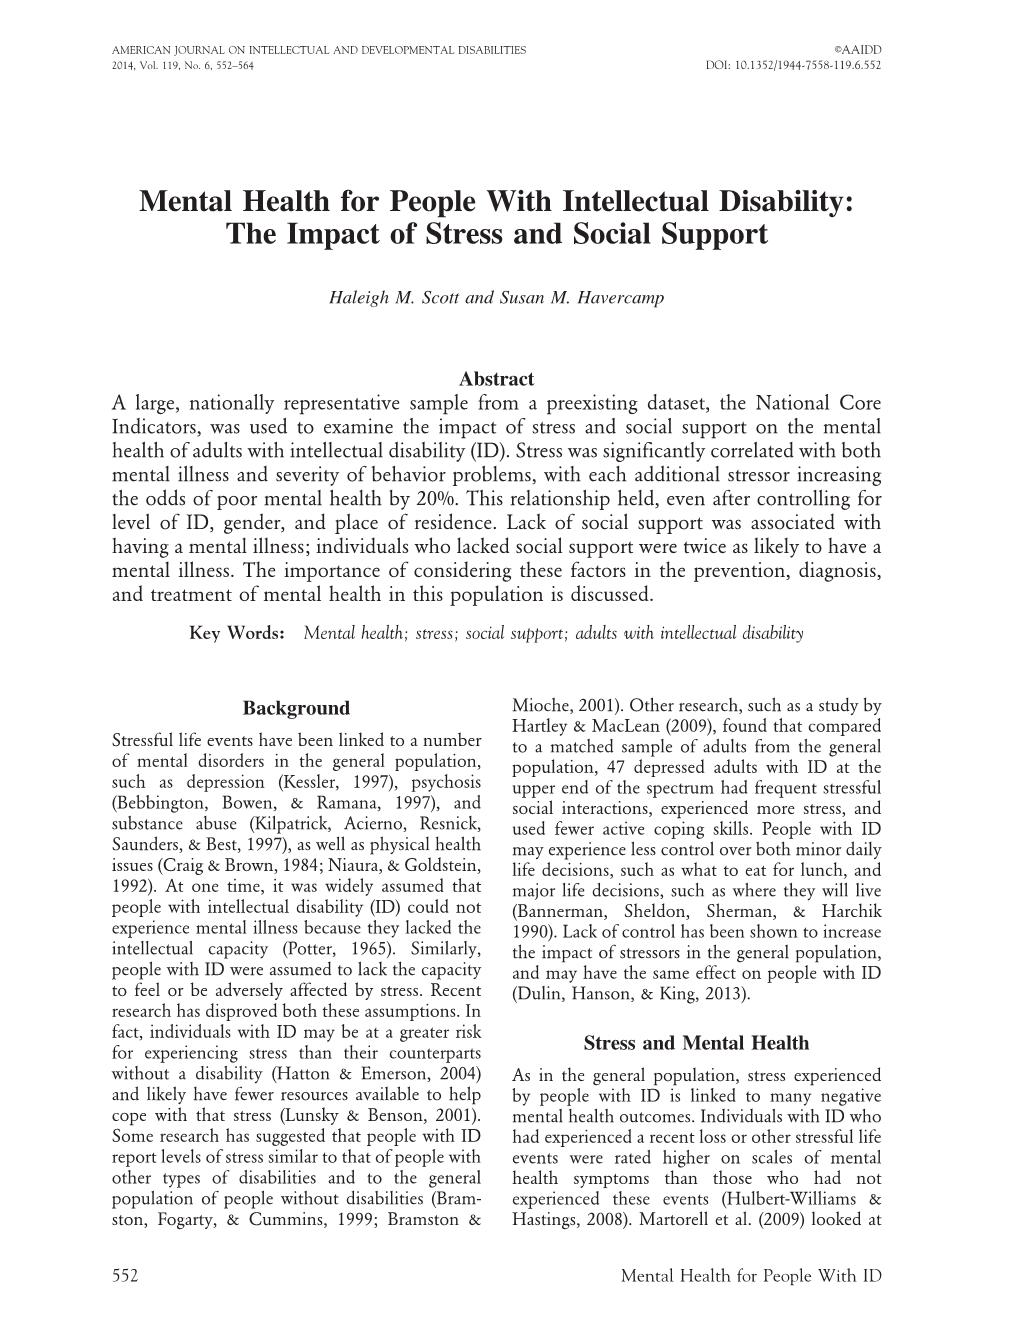 Mental Health for People with Intellectual Disability: the Impact of Stress and Social Support